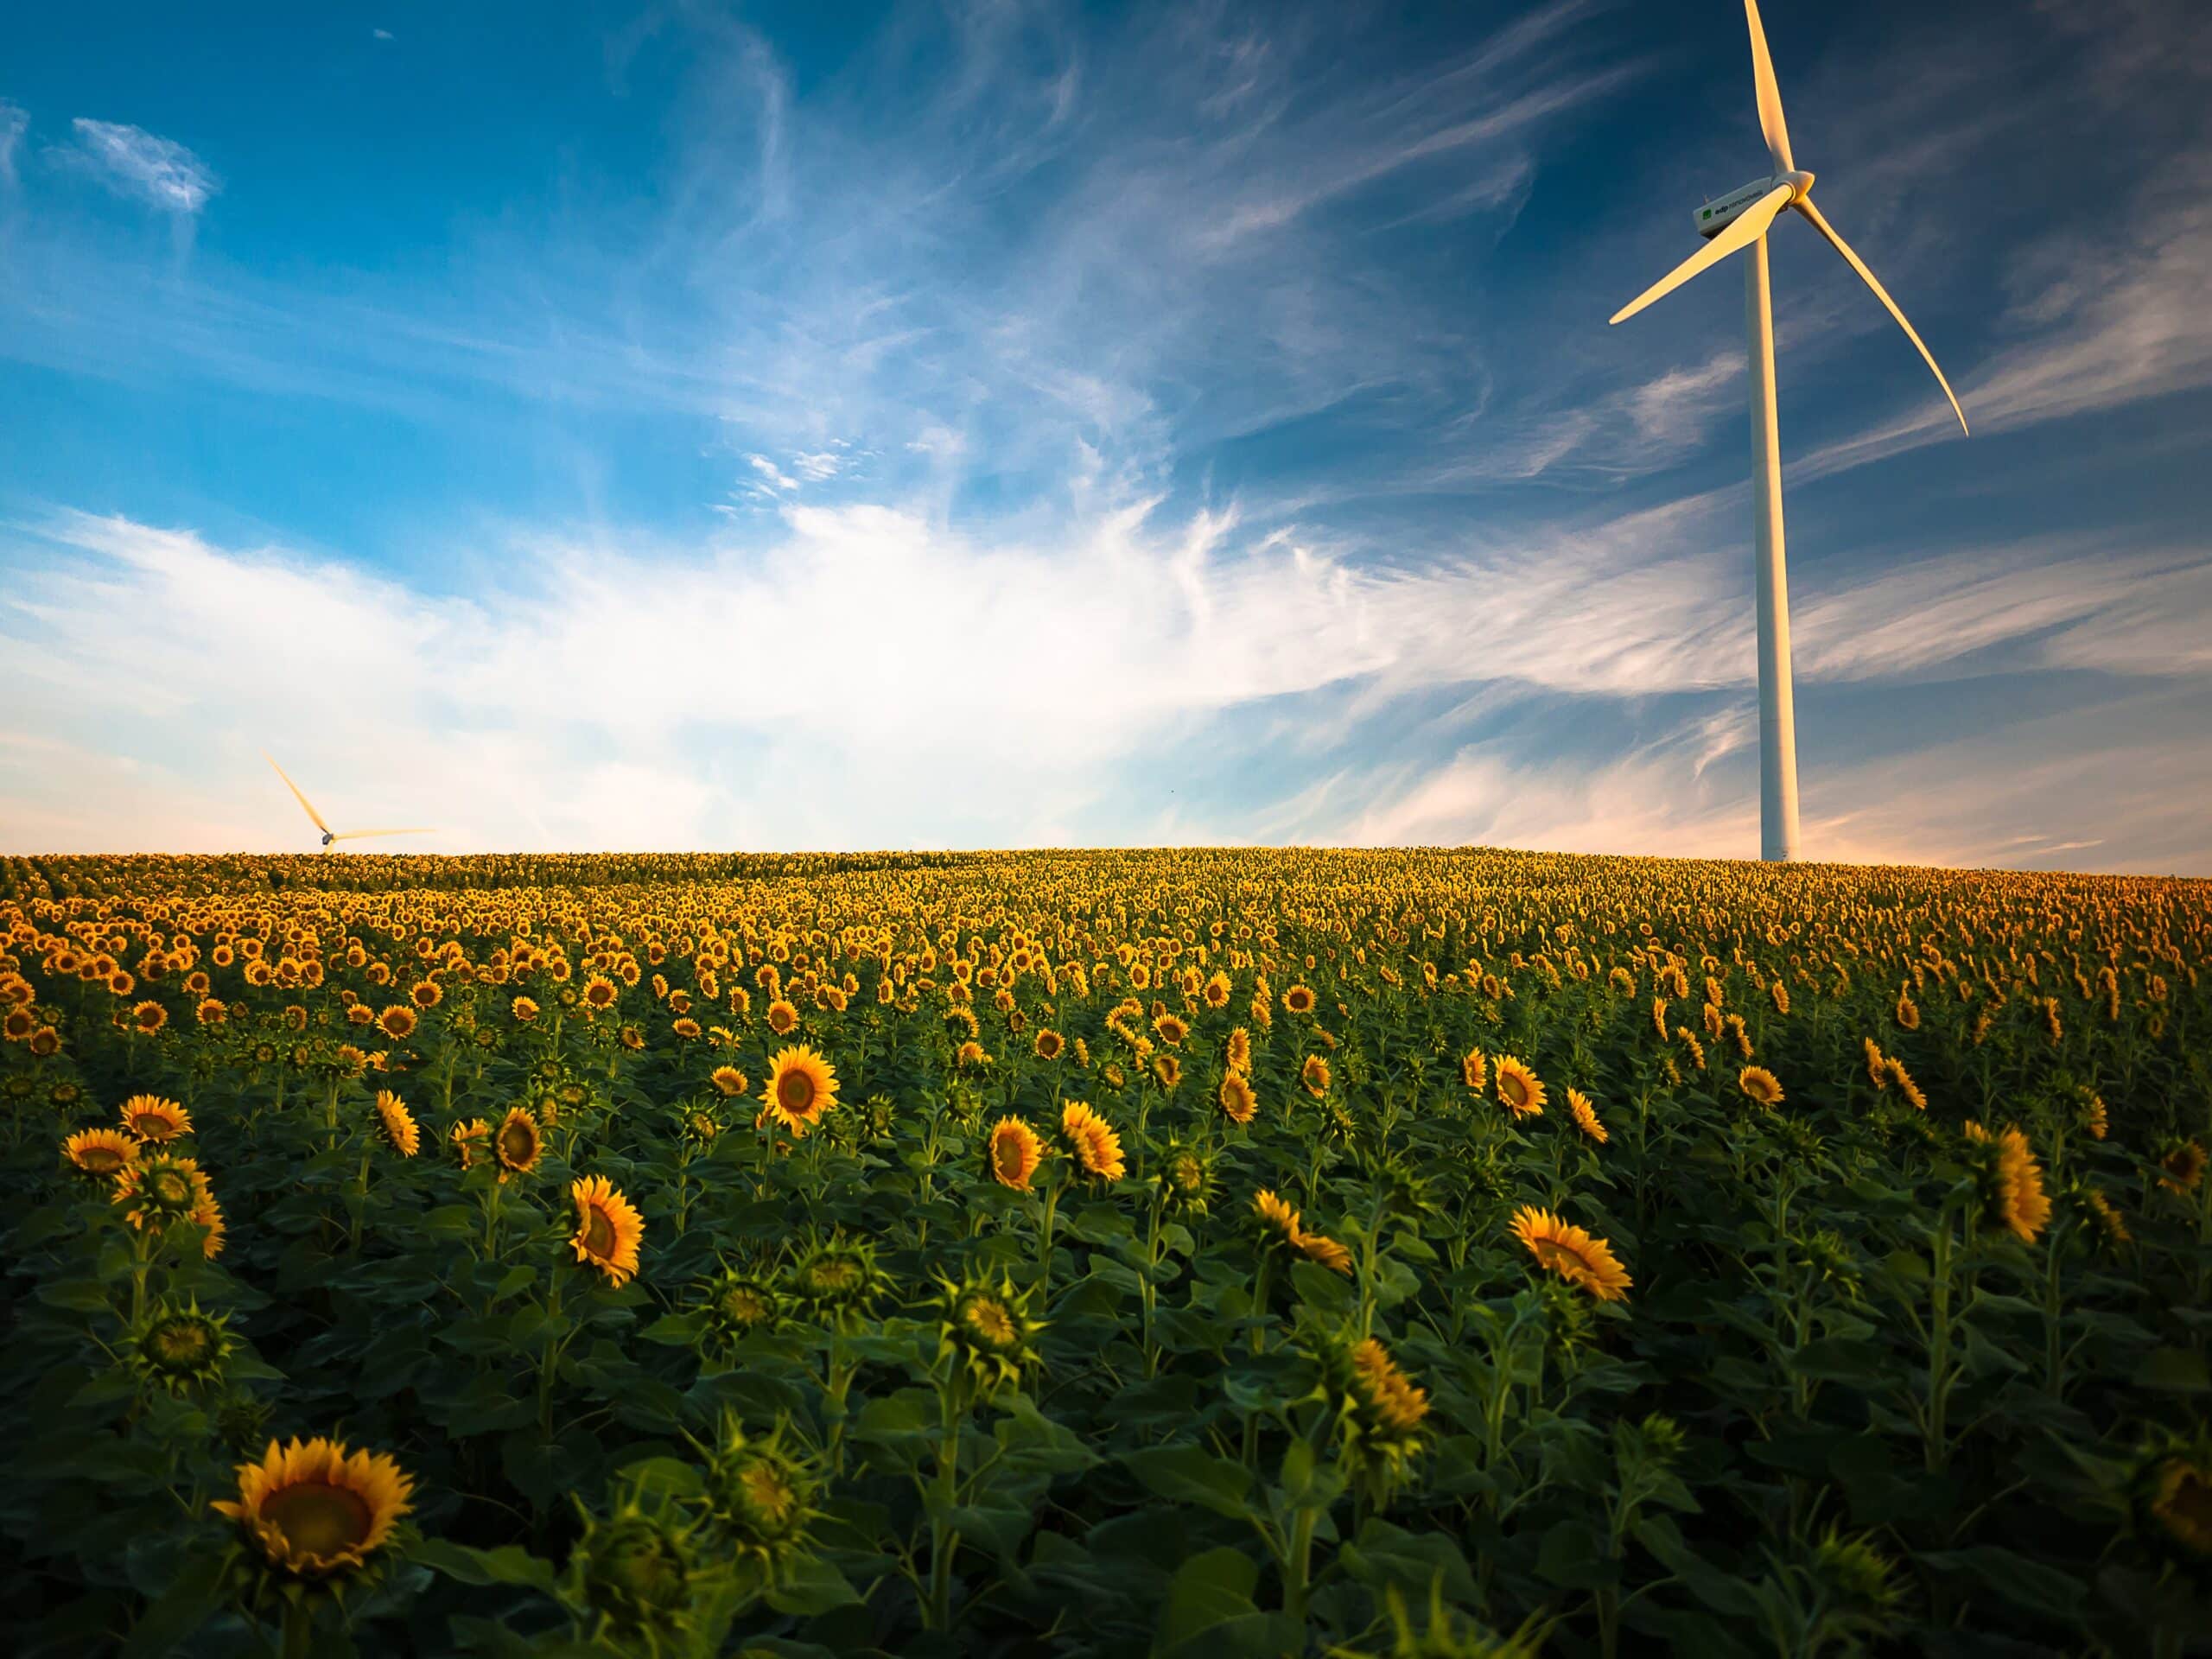 Battle Born Batteries: A windmill for Renewable Energy sits in a field of dasies